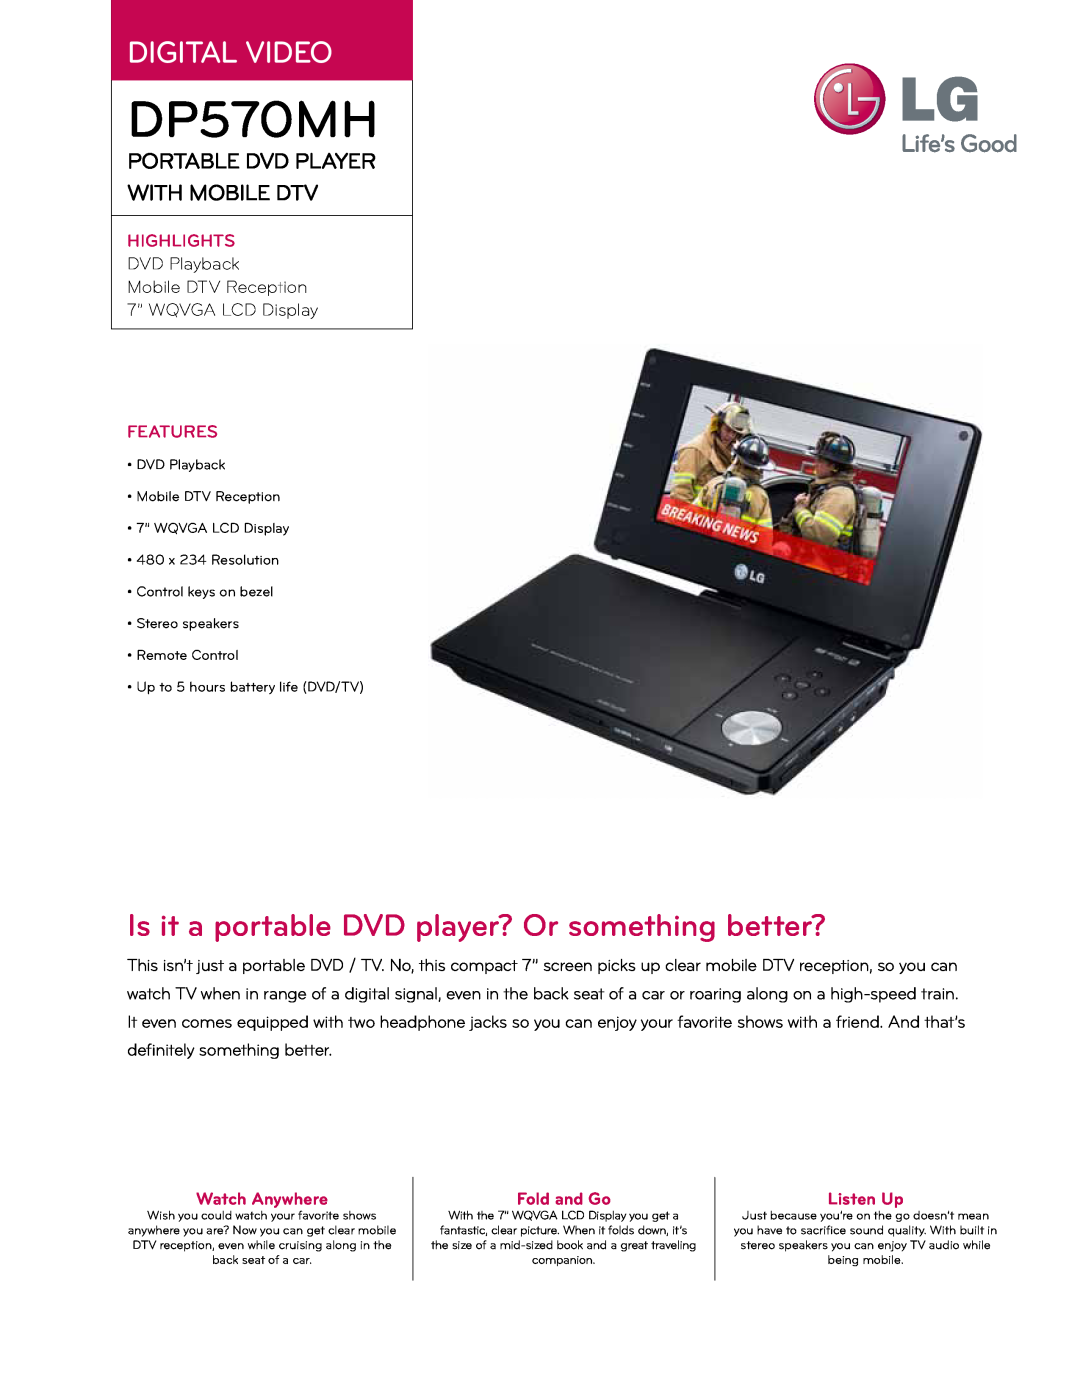 LG Electronics DP570MH manual Digital Video, Is it a portable DVD player? Or something better?, Highlights, Features 